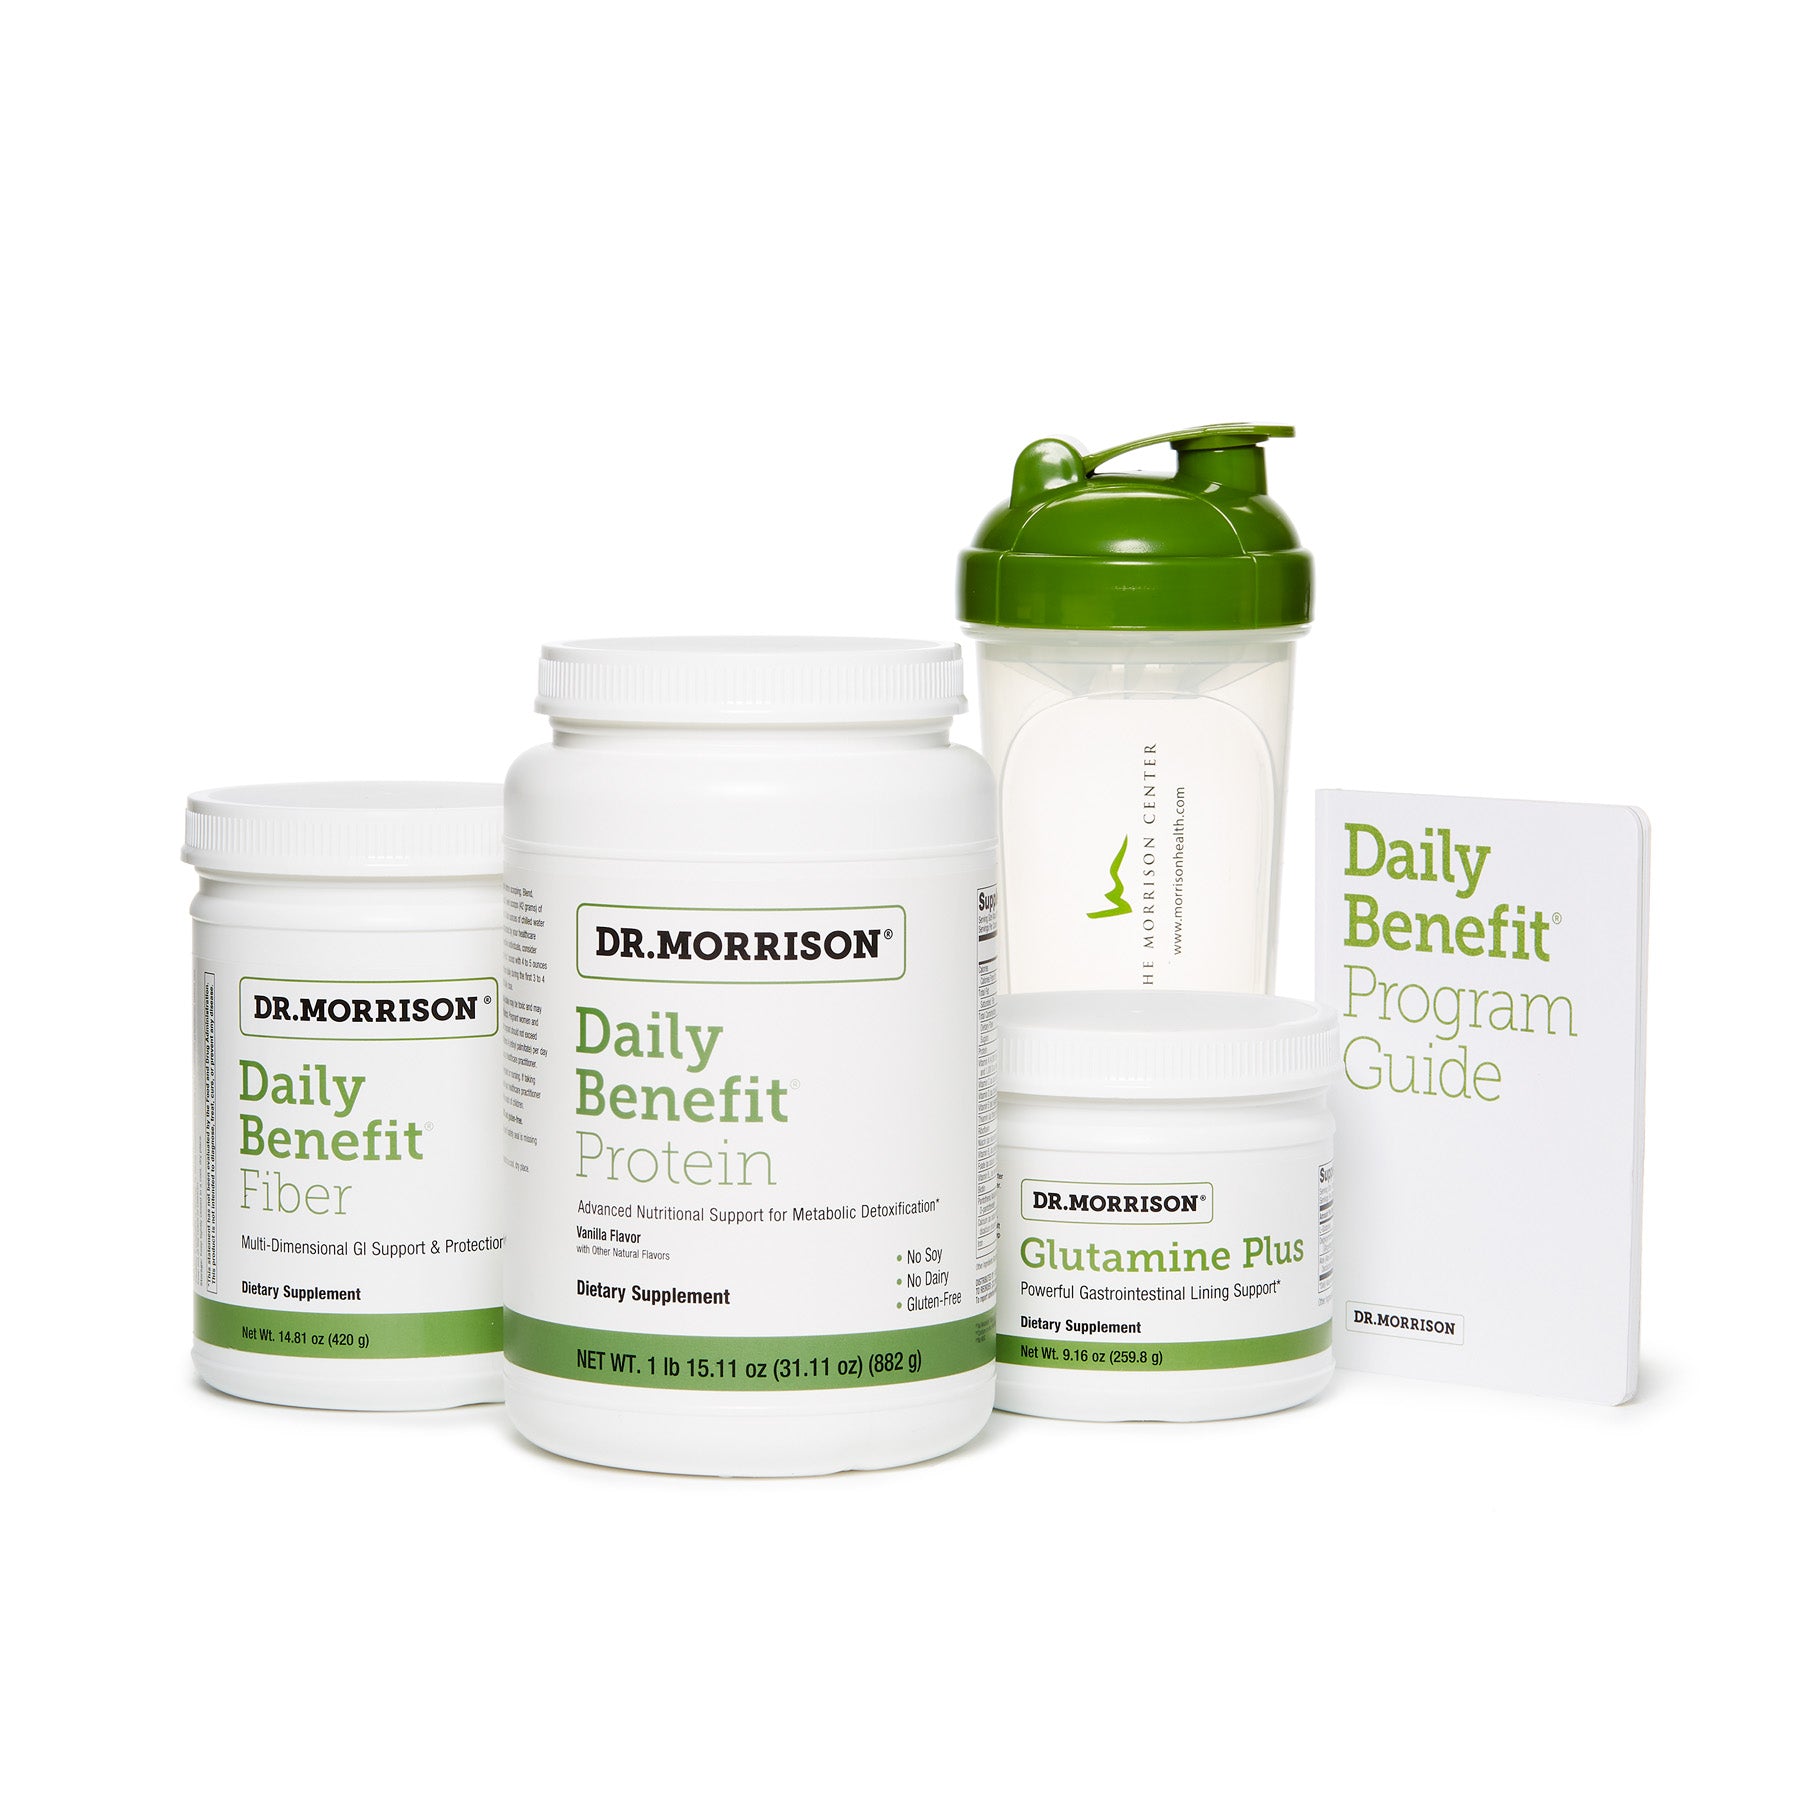 10-Day Daily Benefit Set Daily Benefit,Other Supplements Dr. Morrison Daily Benefit   